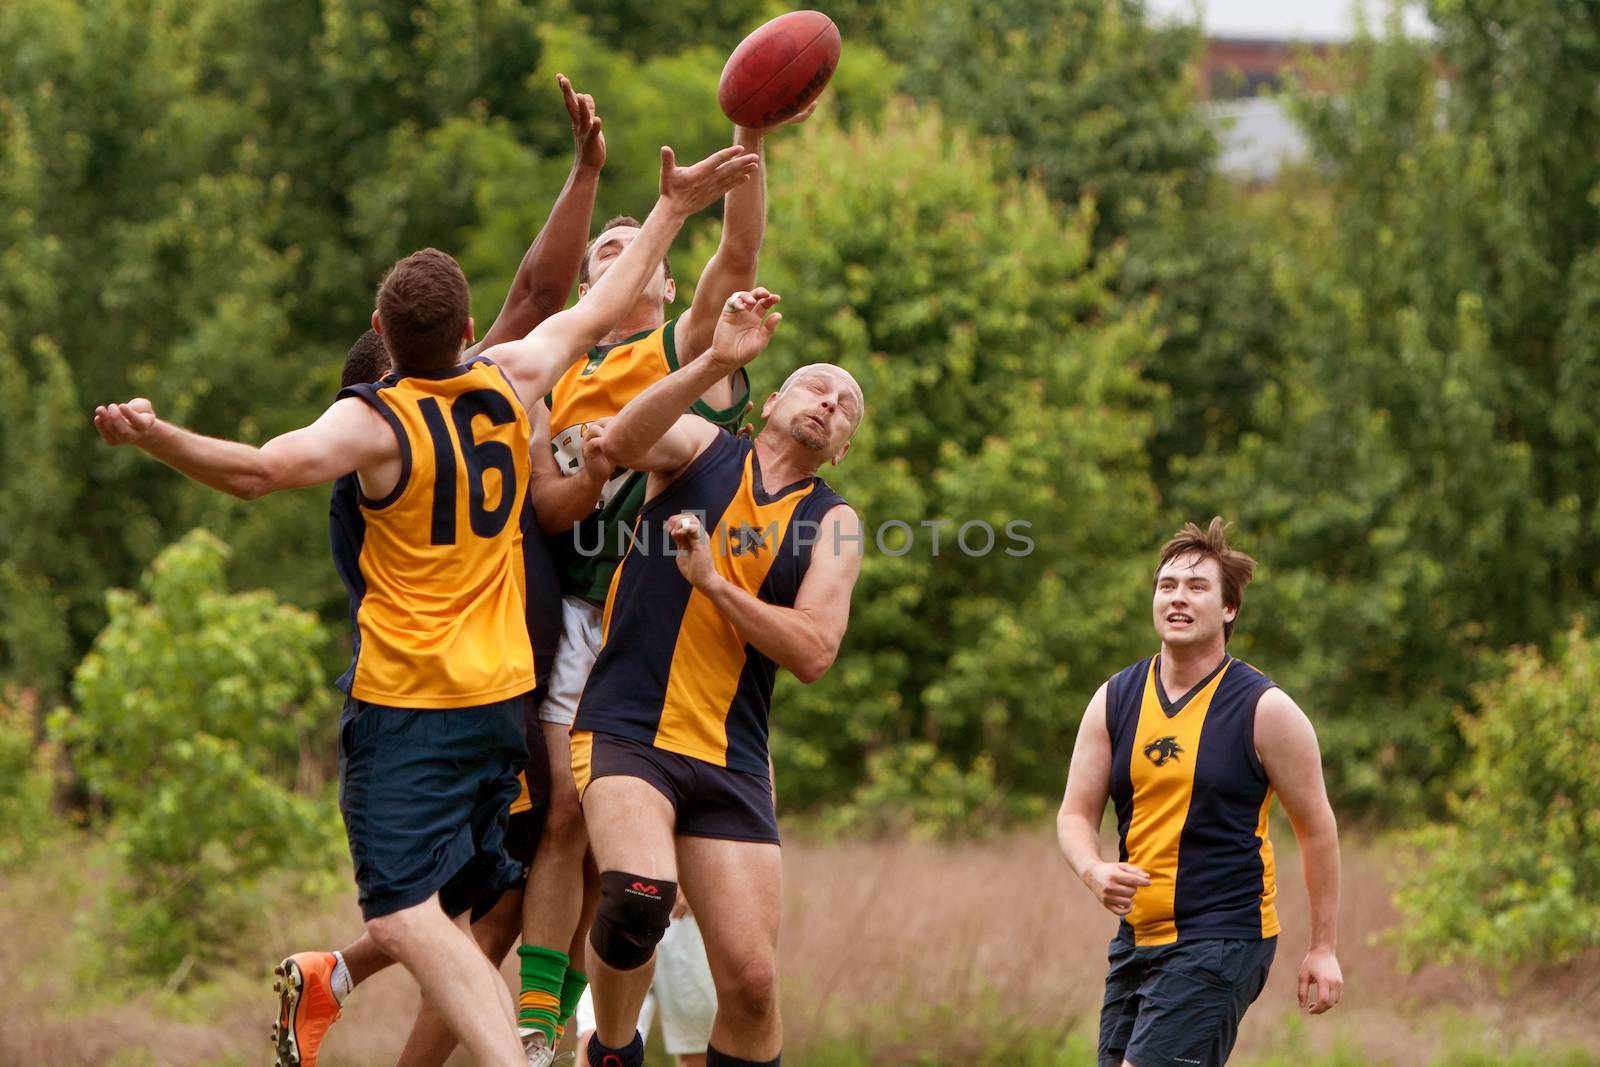 Players Jump To Catch Ball In Australian Rules Football Game by BluIz60